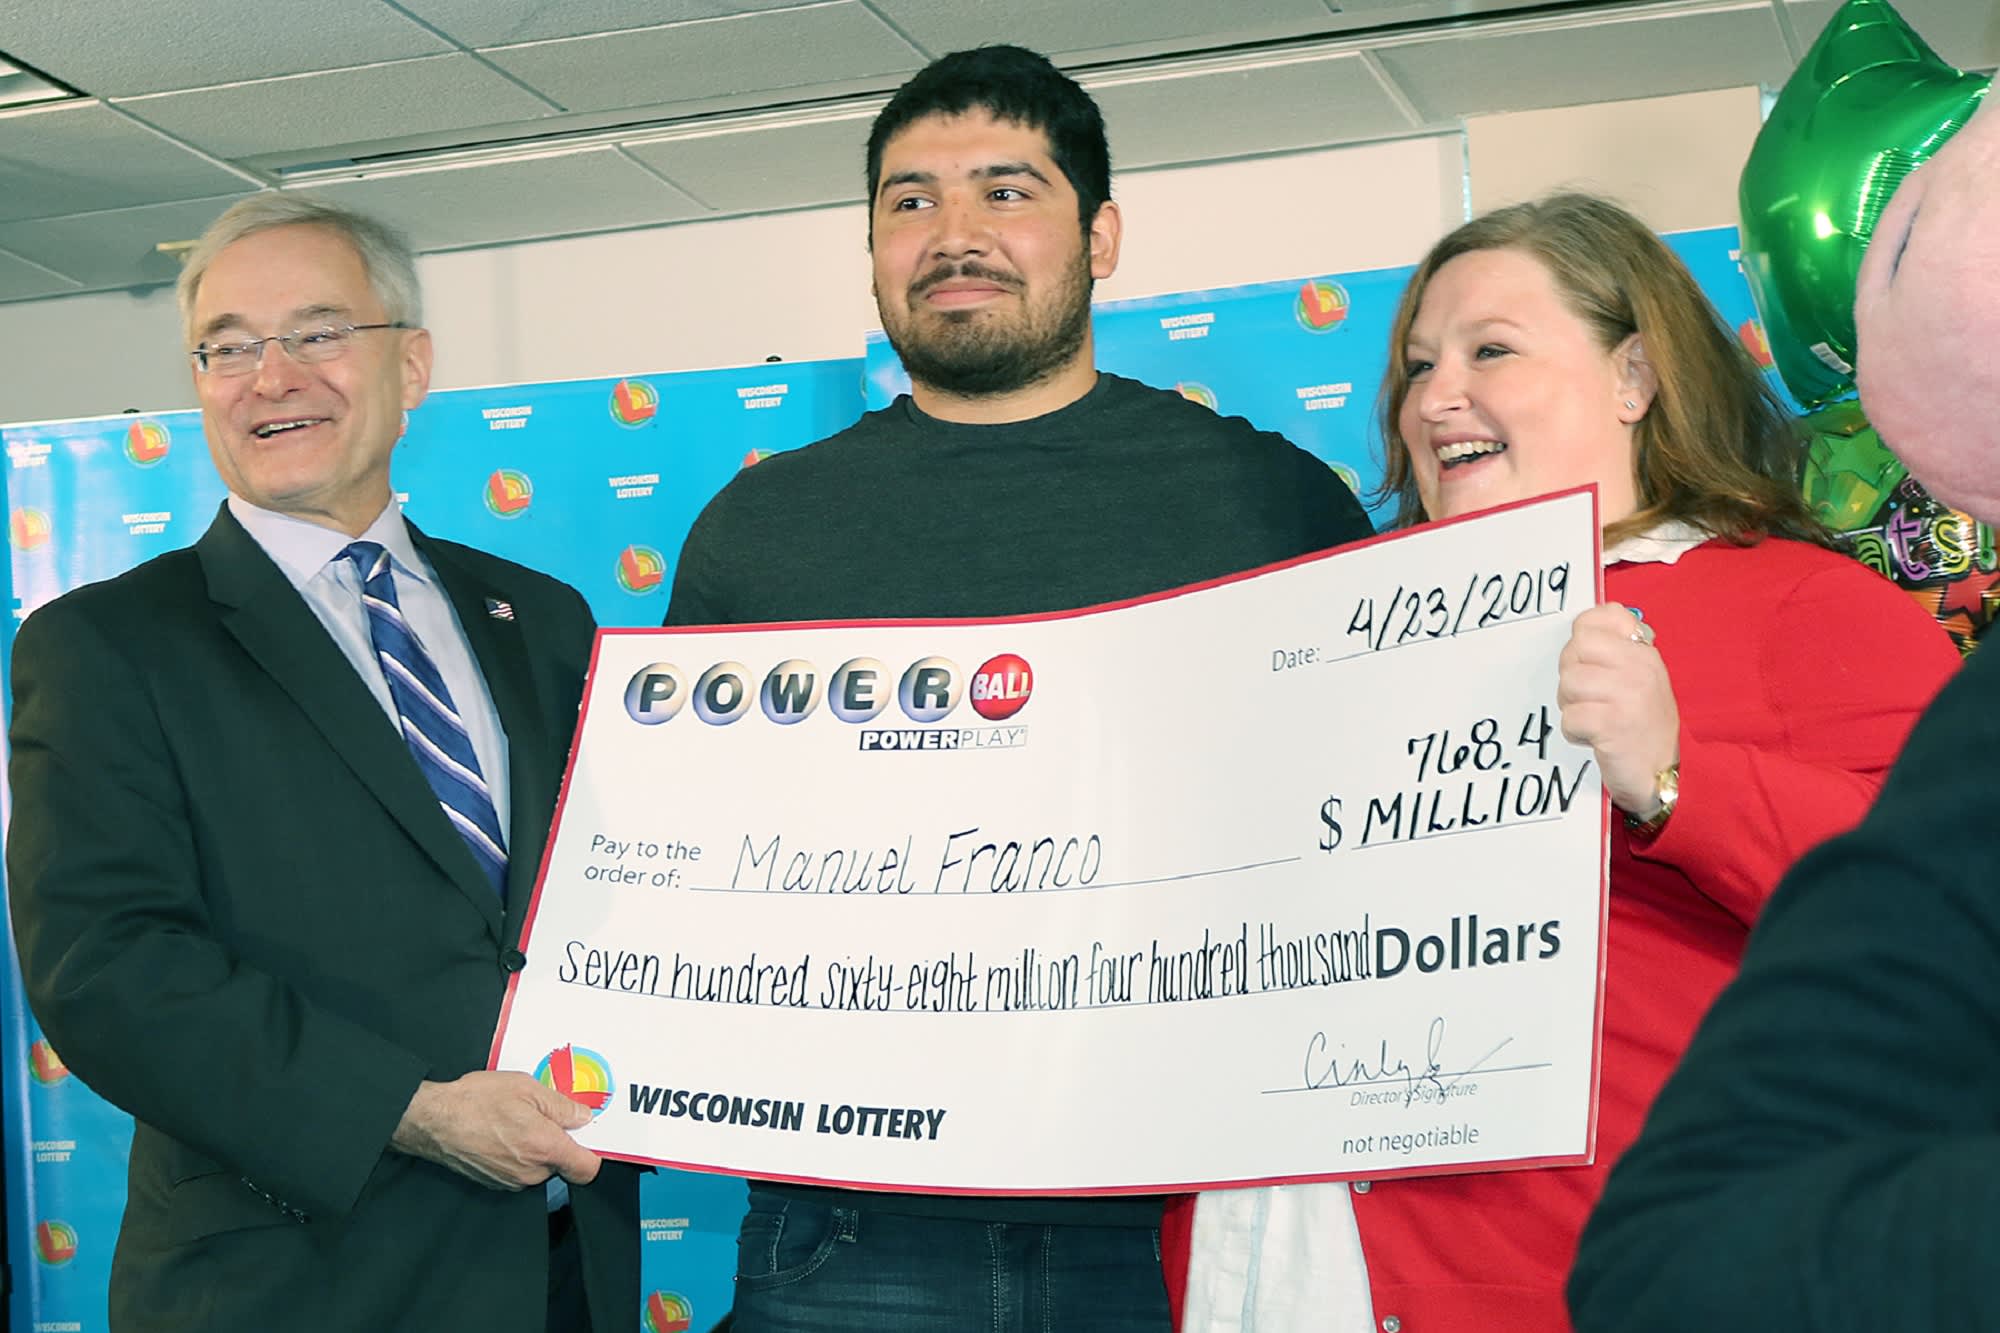 Flipboard: The 24-year-old winner of the $768 million Powerball had under $1,000 in ...2000 x 1333